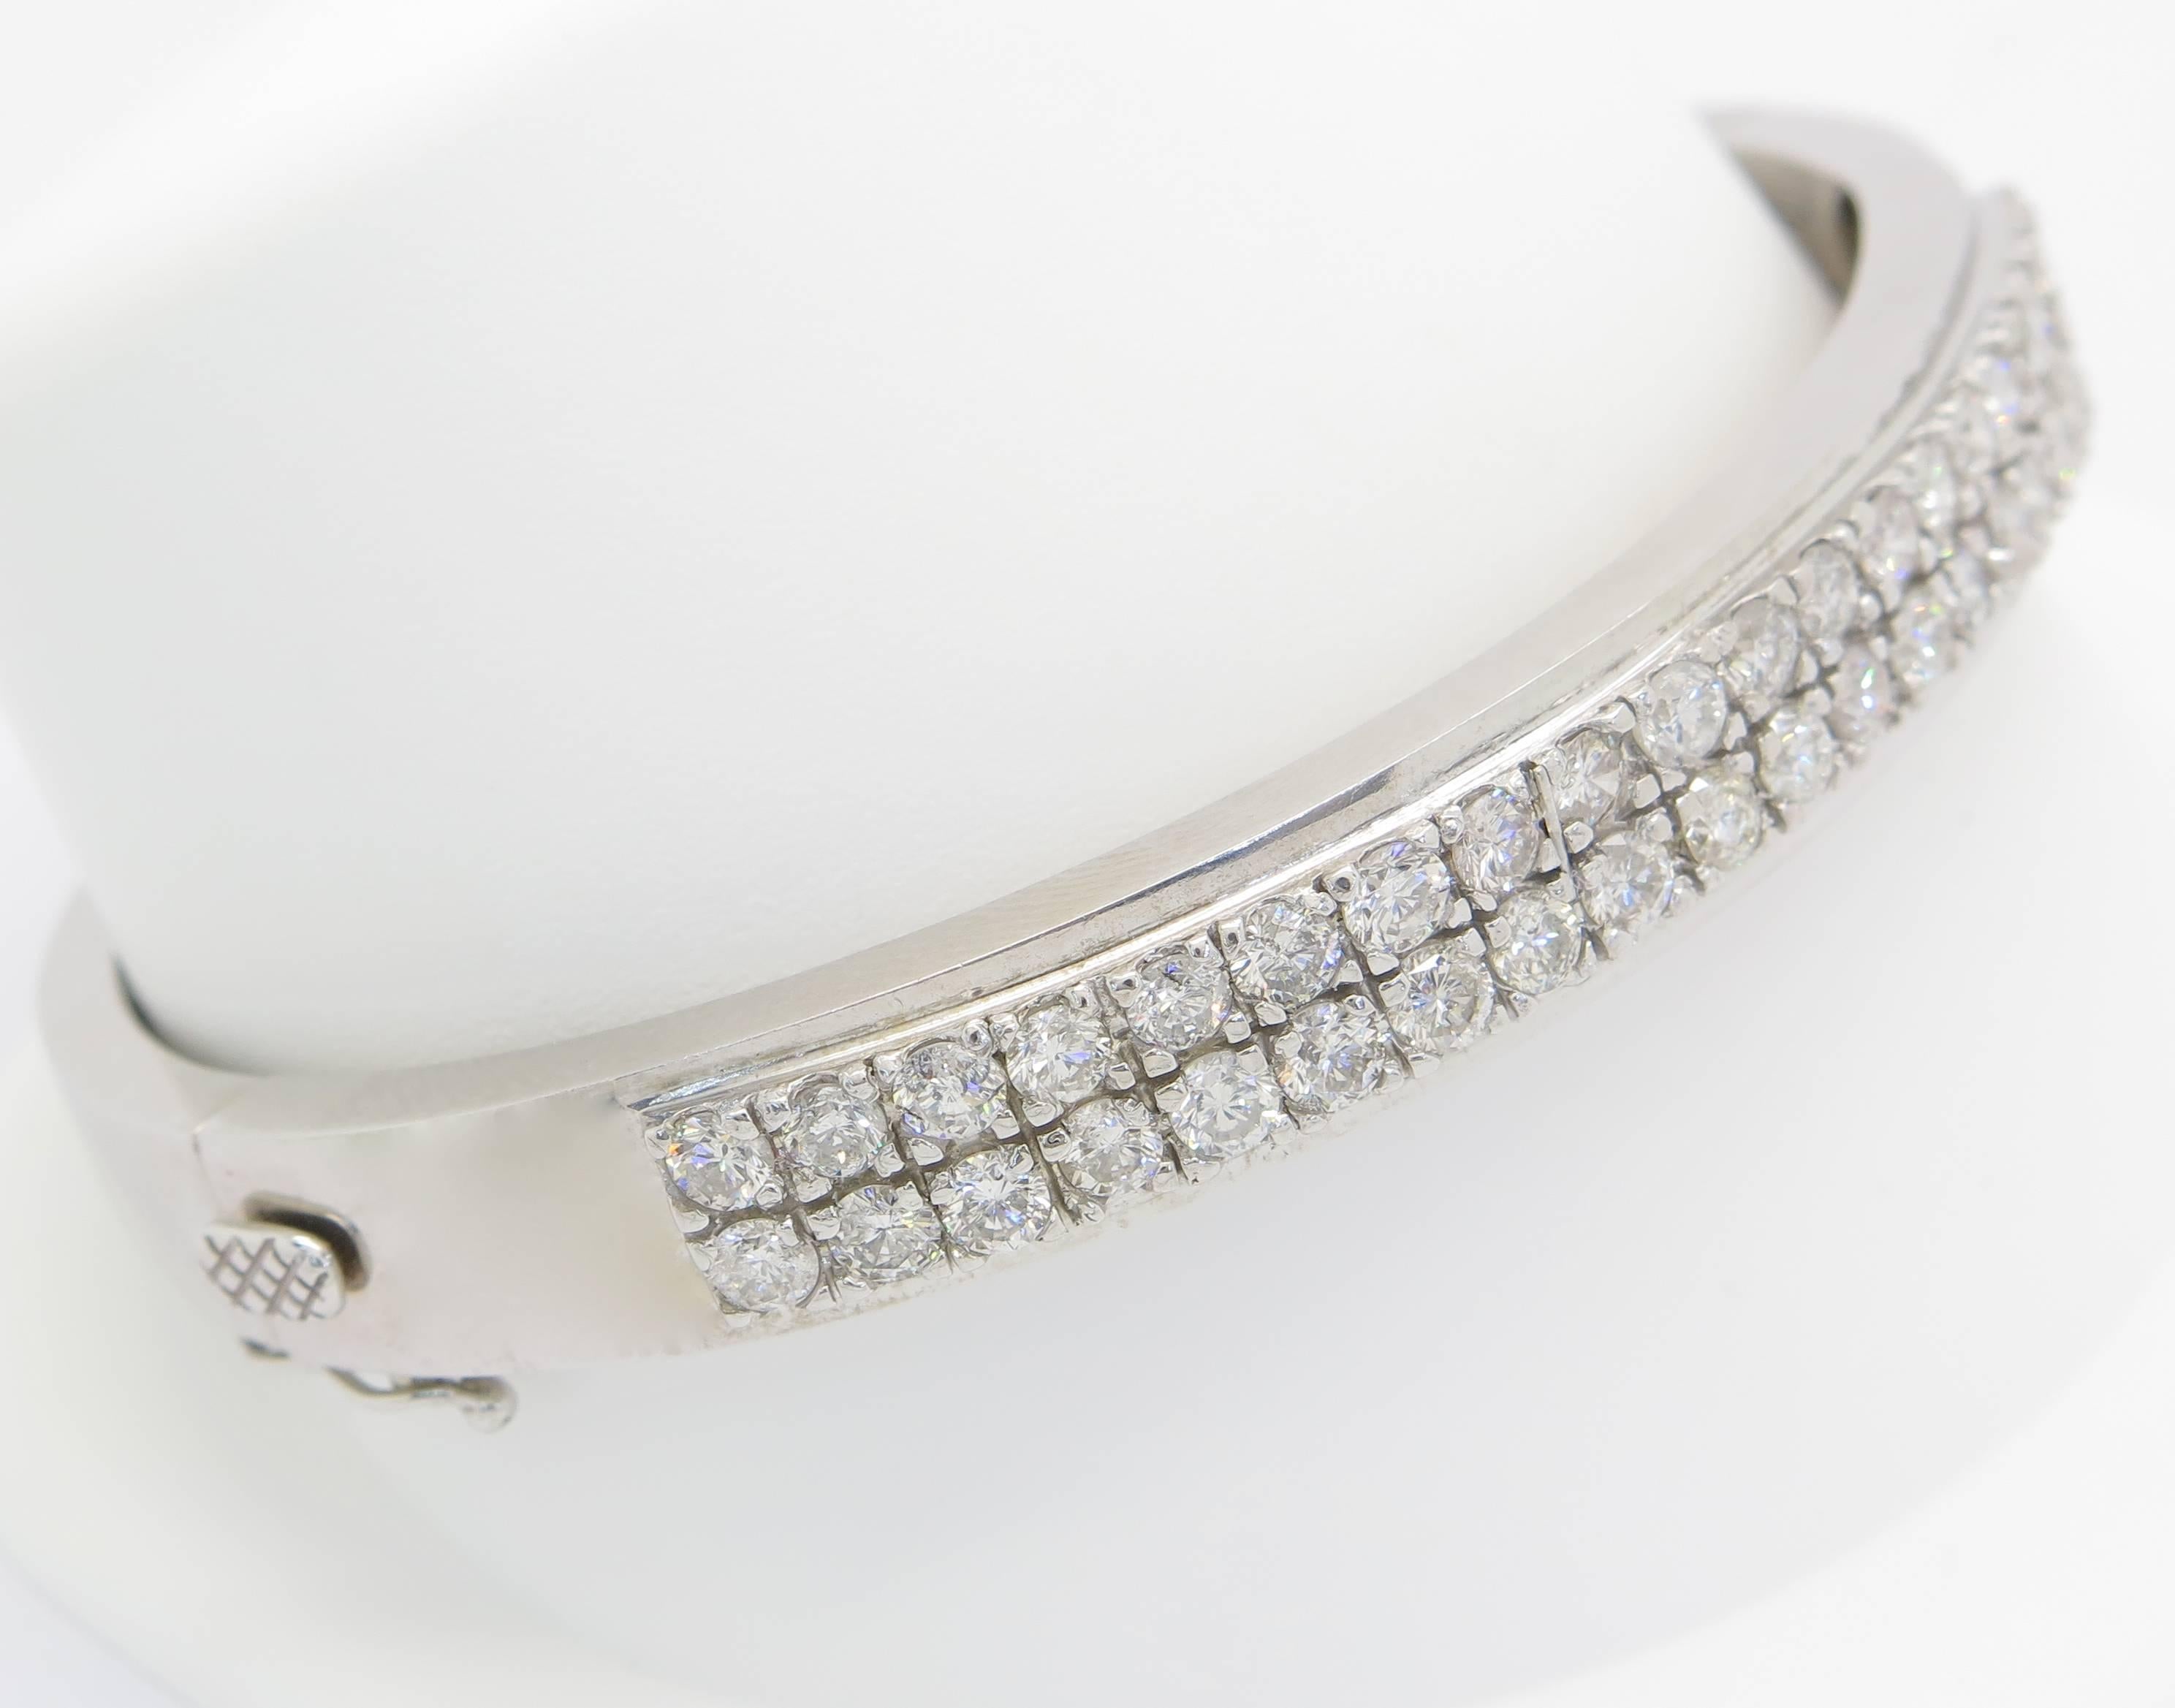 The bangle features 40 round brilliant cut diamonds weighing in total 4.00 carats. The diamonds are G-I in color and SI1 in clarity. The diamonds are prong set in a double row bangle style bracelet. This timeless piece would make a perfect addition